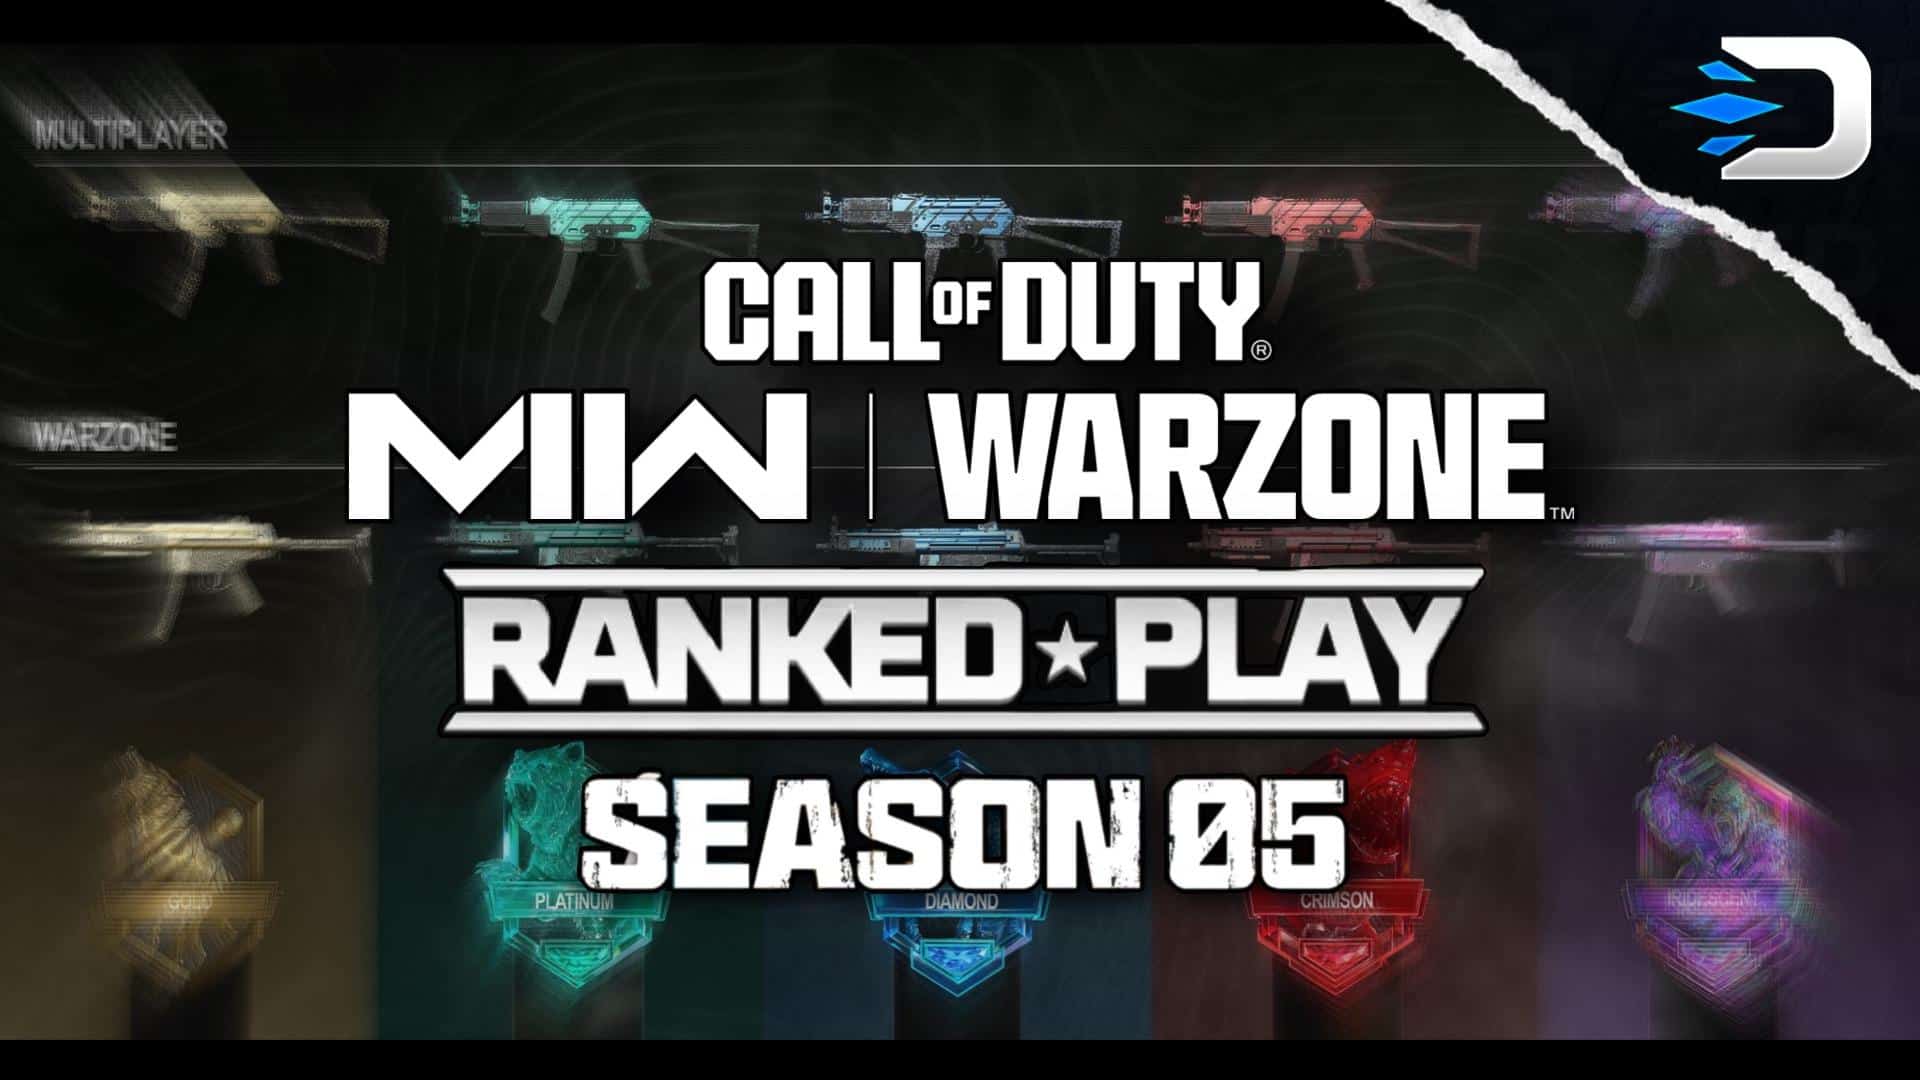 Why is ranked play down in MW2 and Warzone season 6?